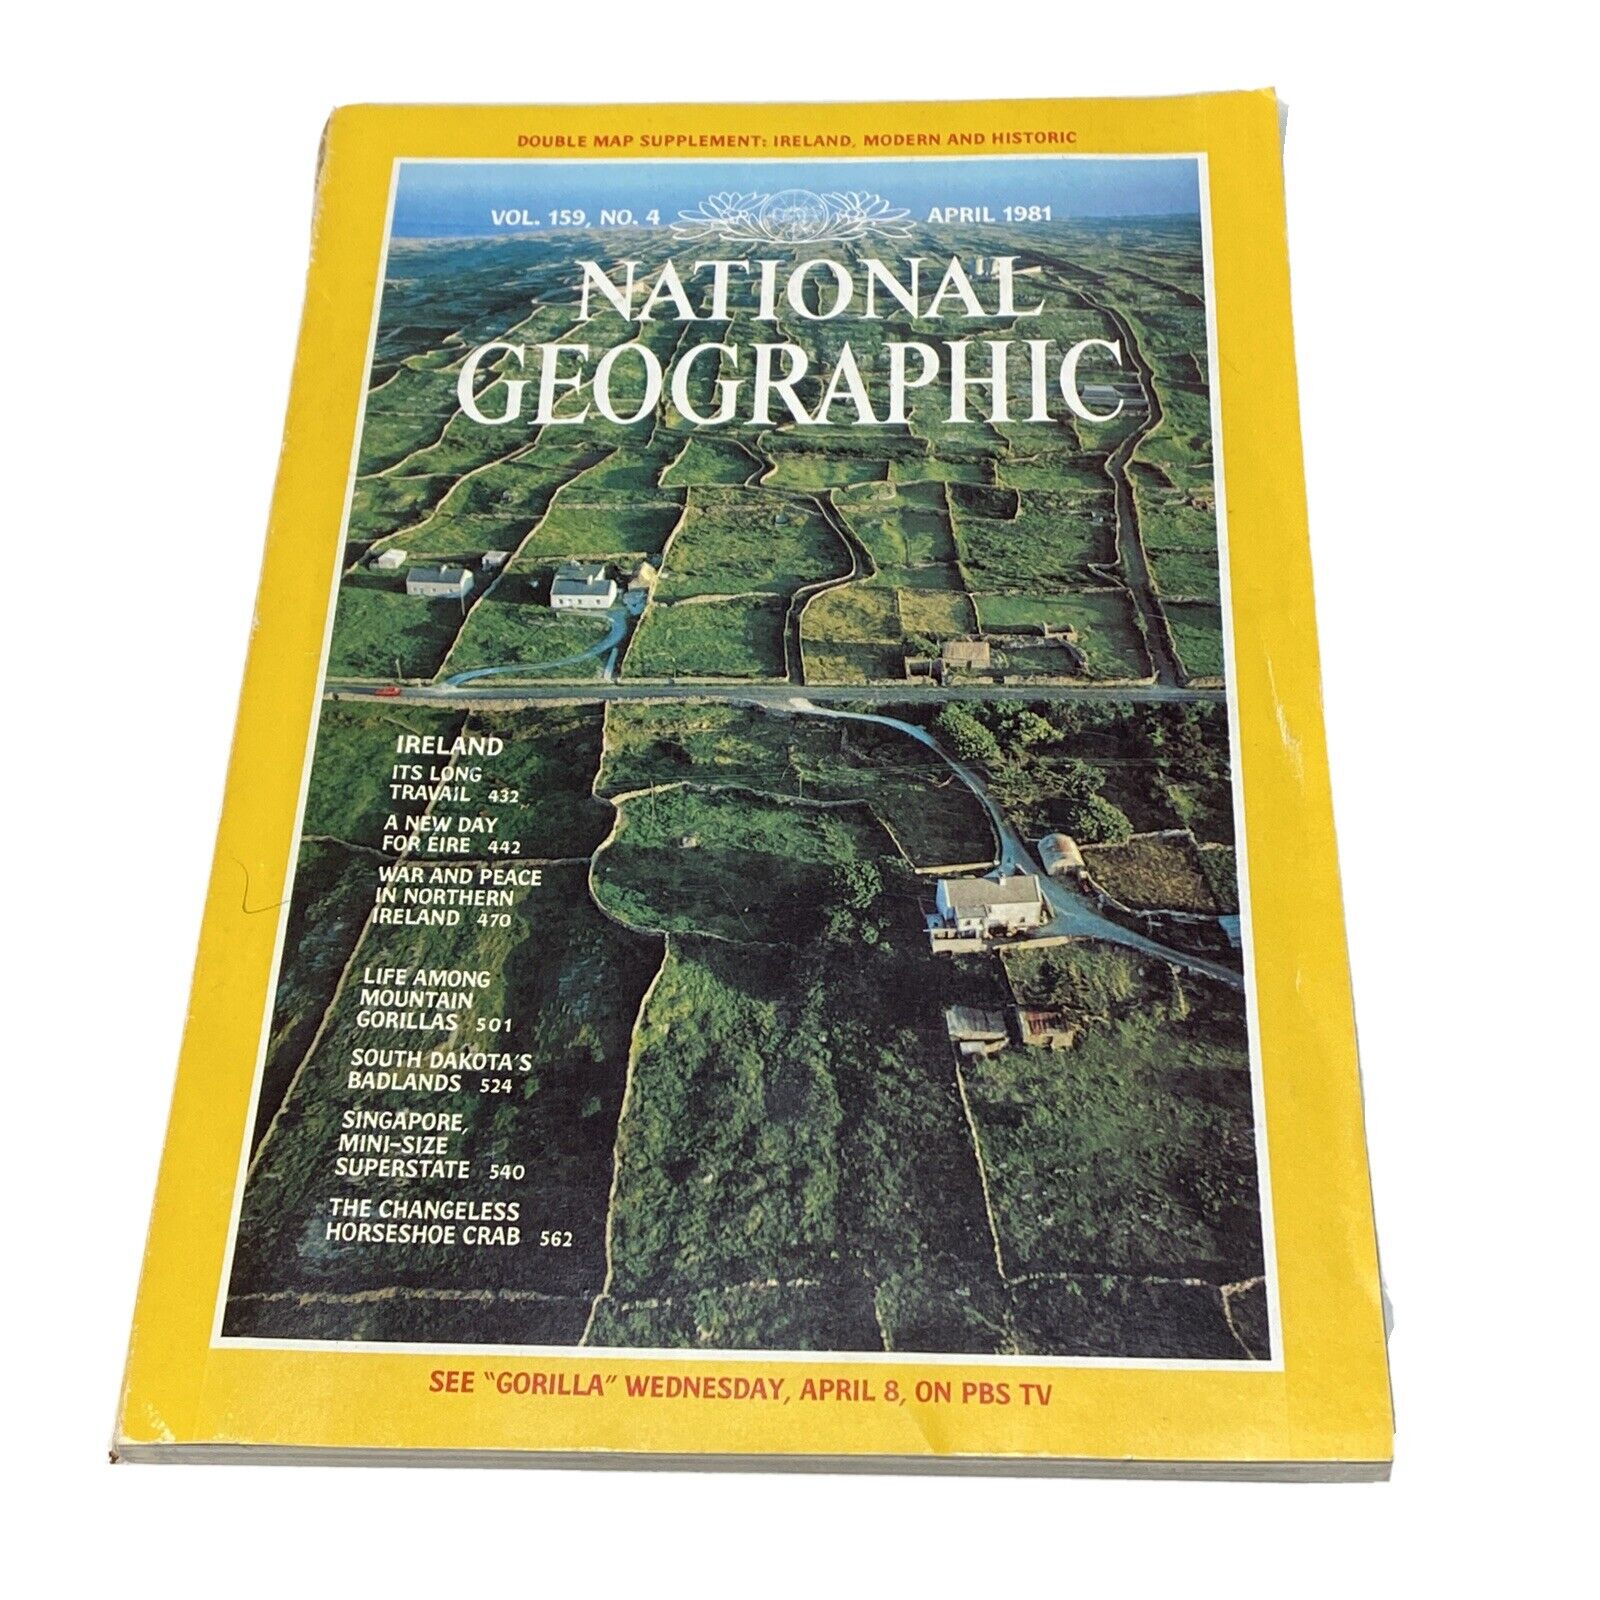 National Geographic Apr 1981 Vol 159 No 4